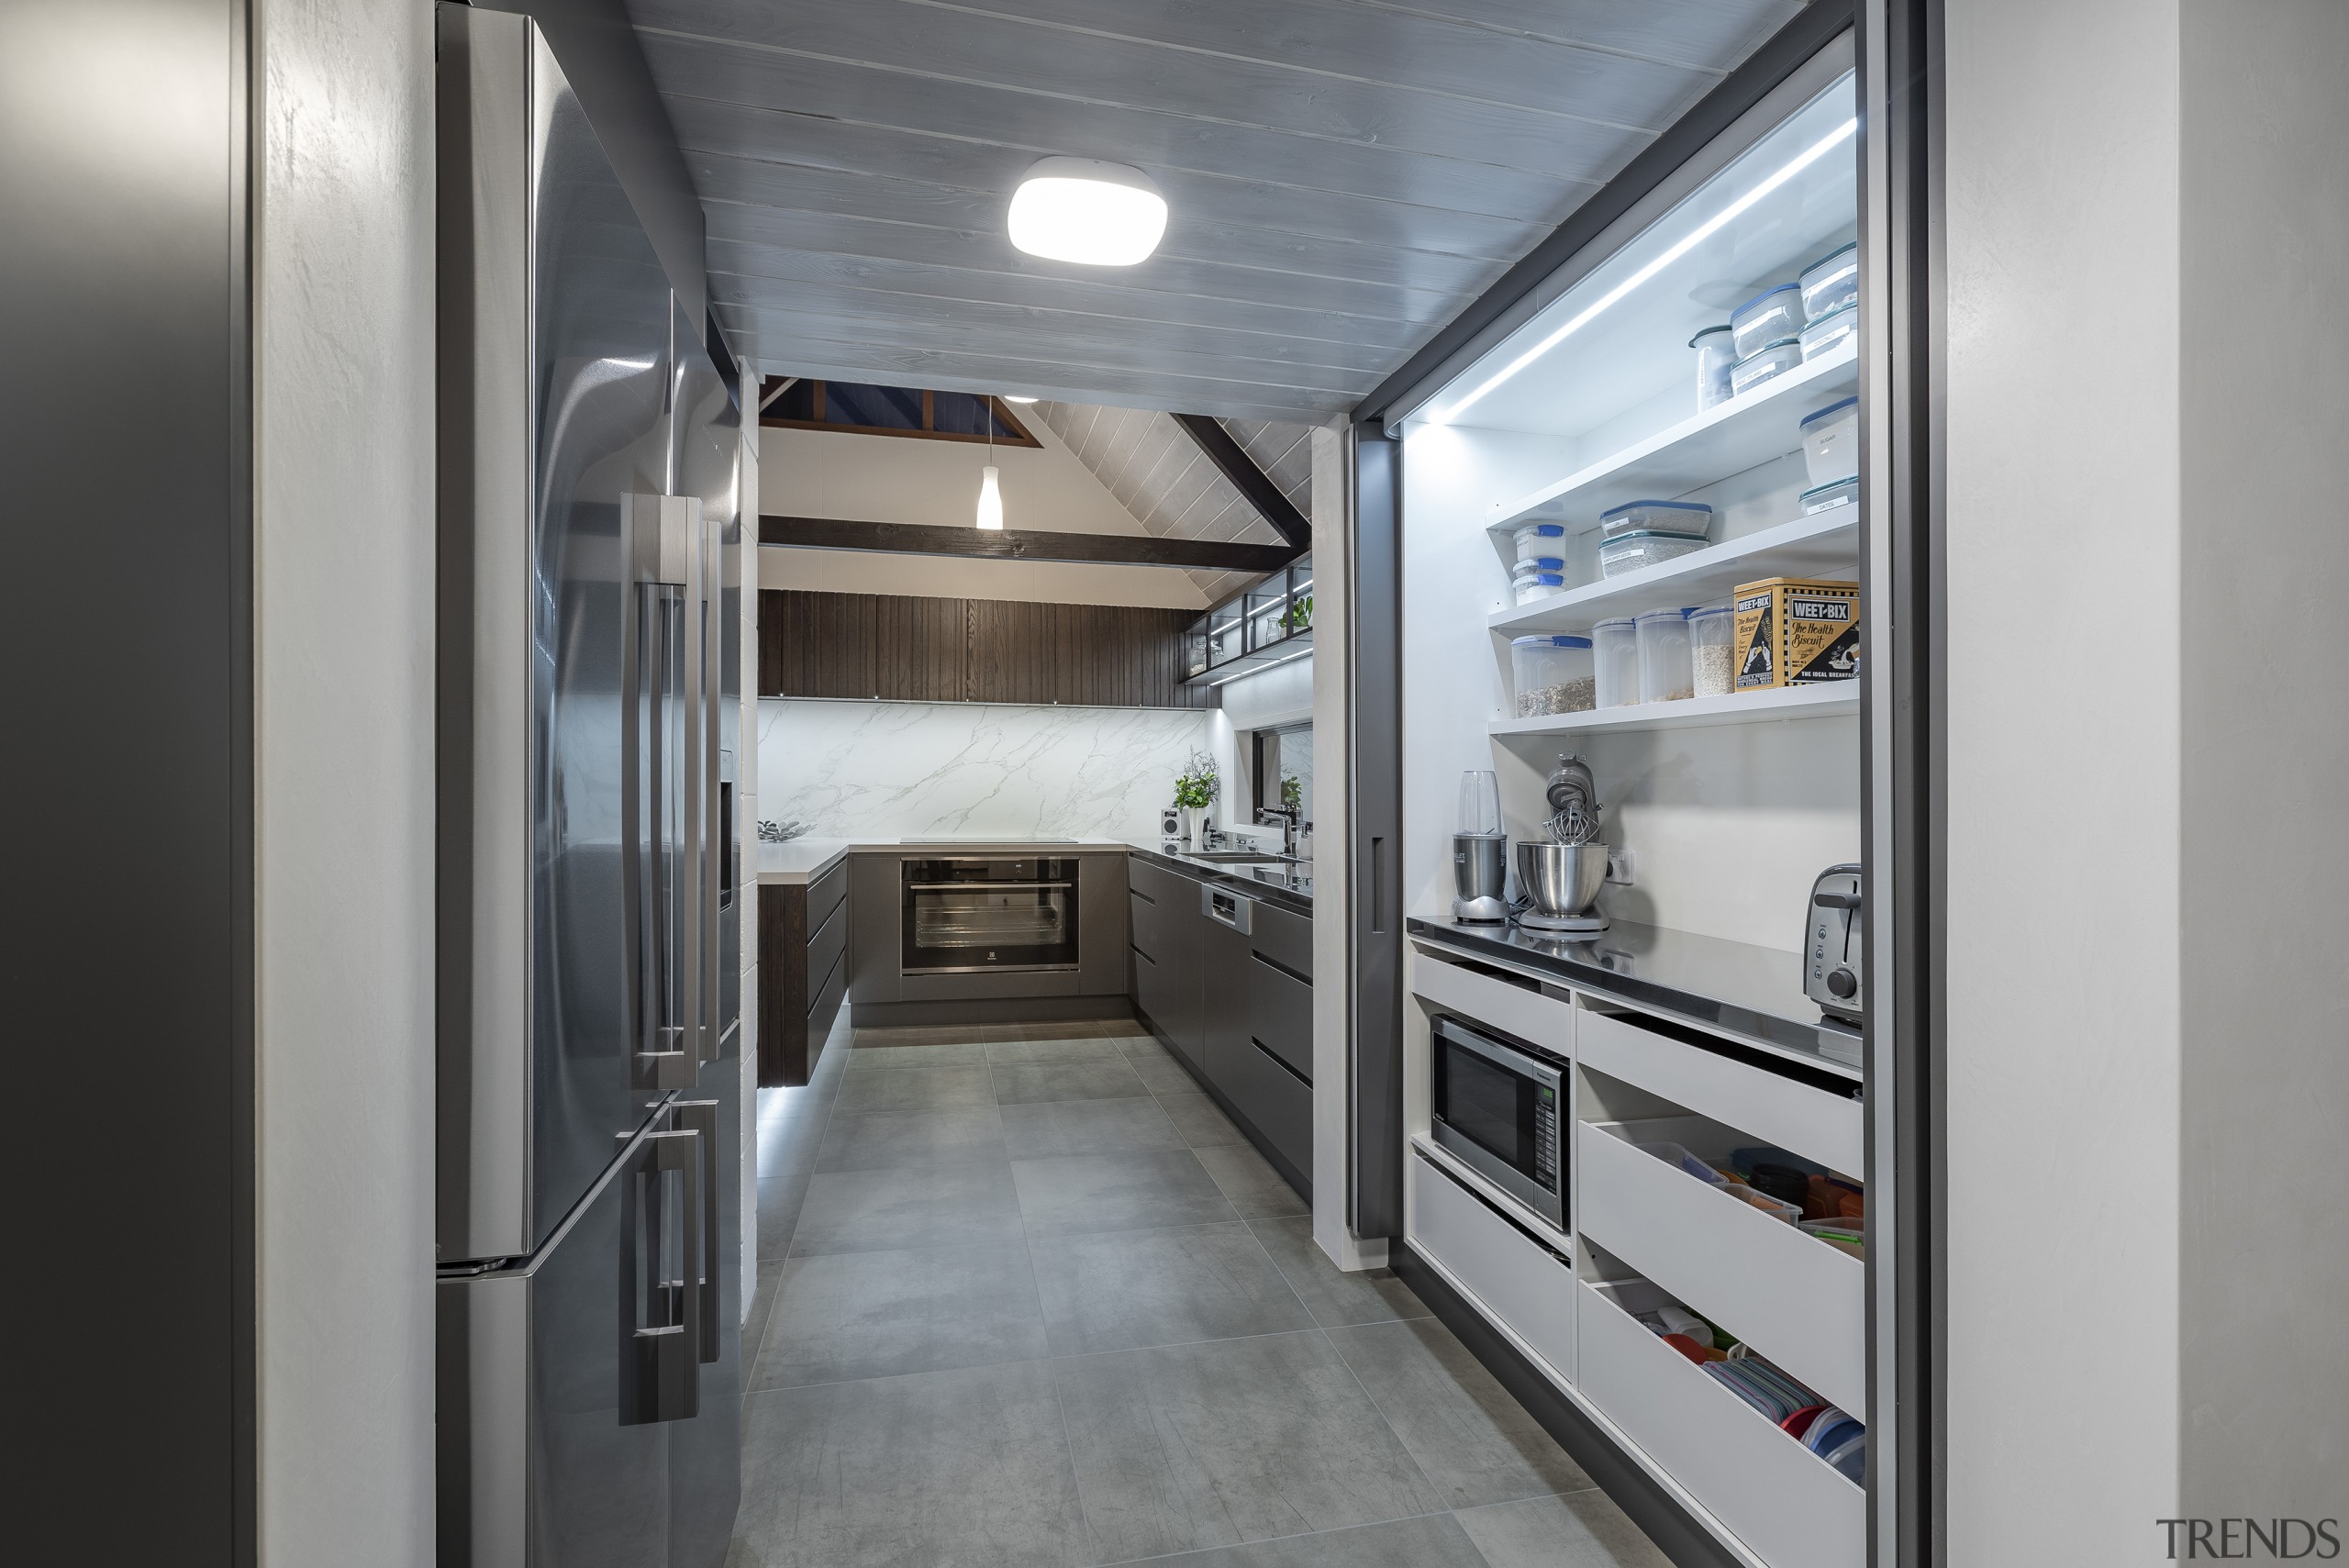 The existing pantry was re-designed with bifold pocket 